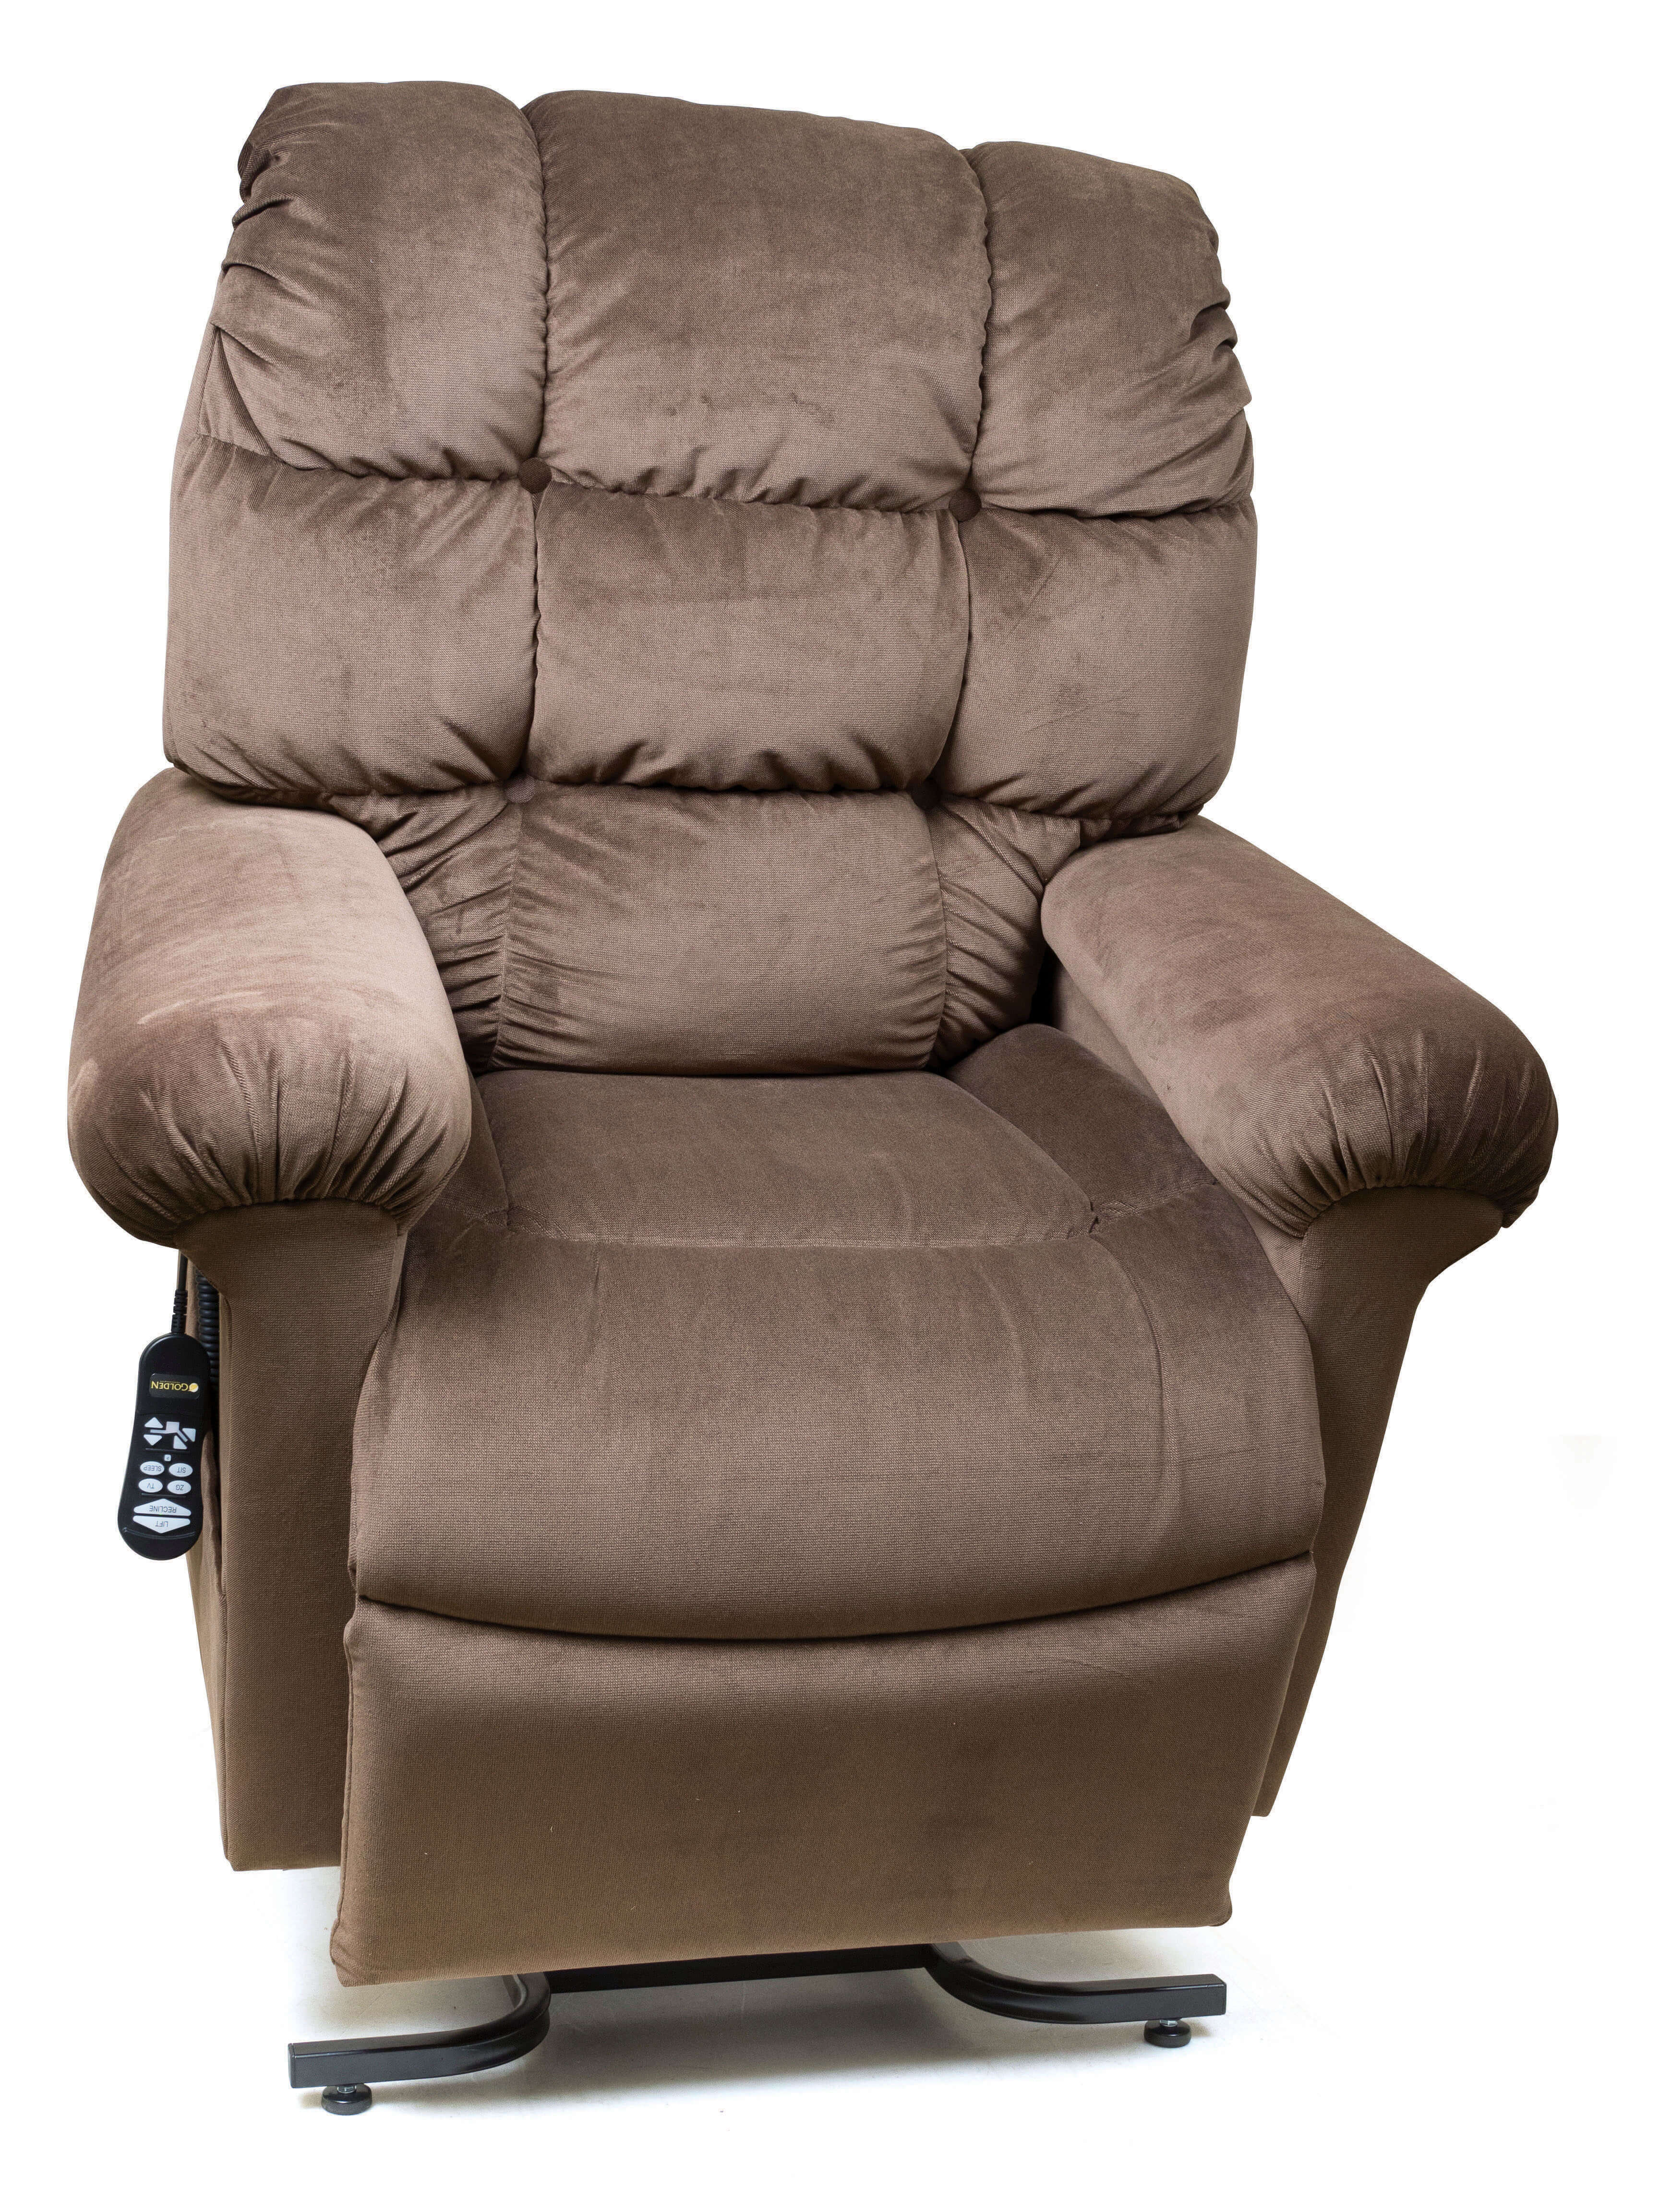 Golden Technologies Introduces Lifetime Warranty On Breathable Fabrics For Its Lift Chairs - Golden